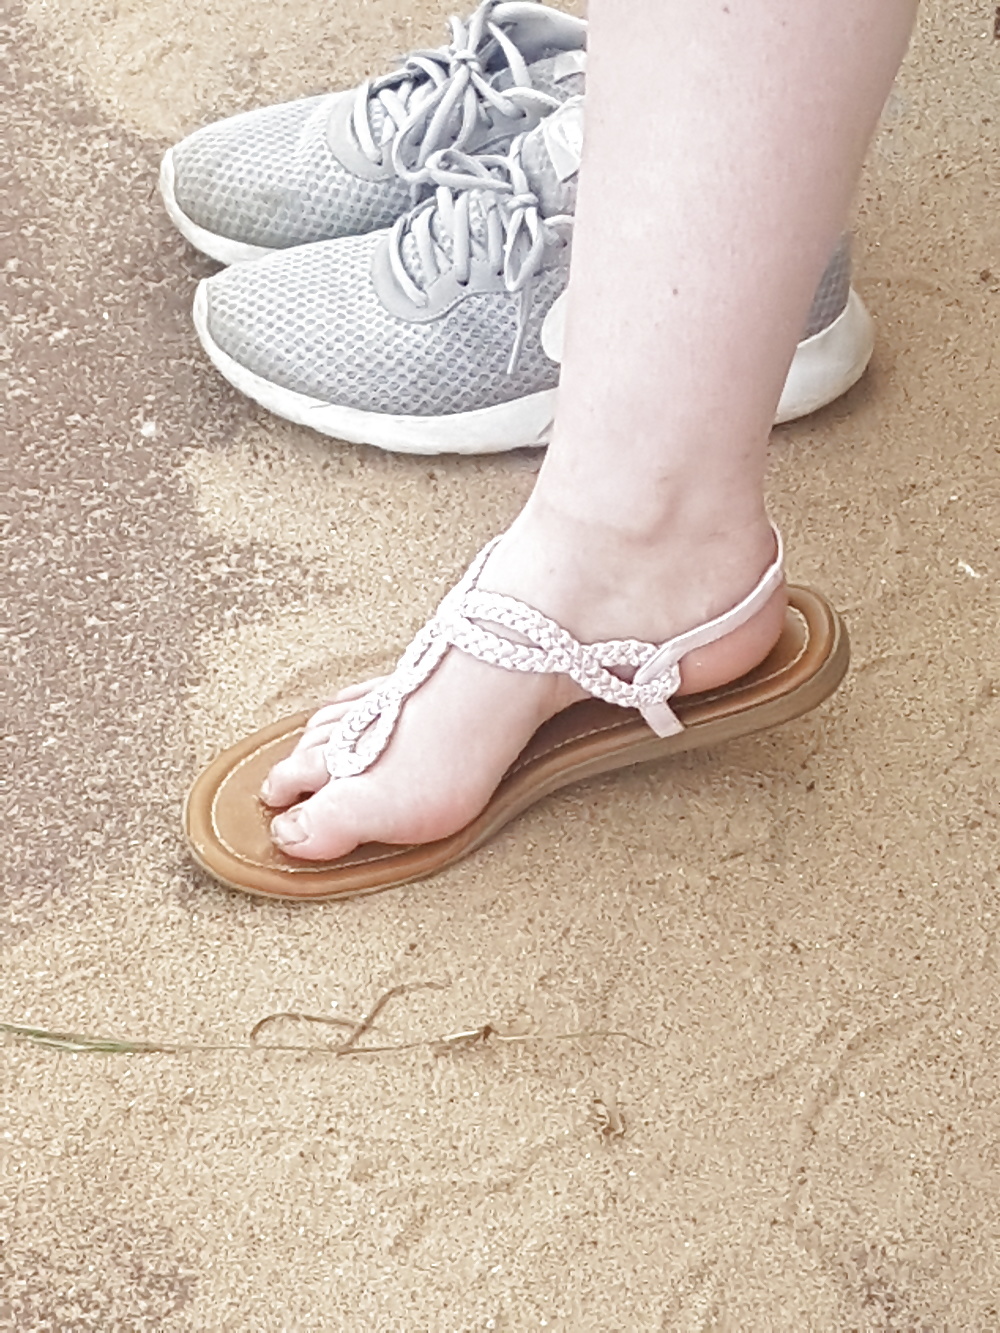 Teen_with_big_tits_beach_feet_soles_stretch_toes (8/20)